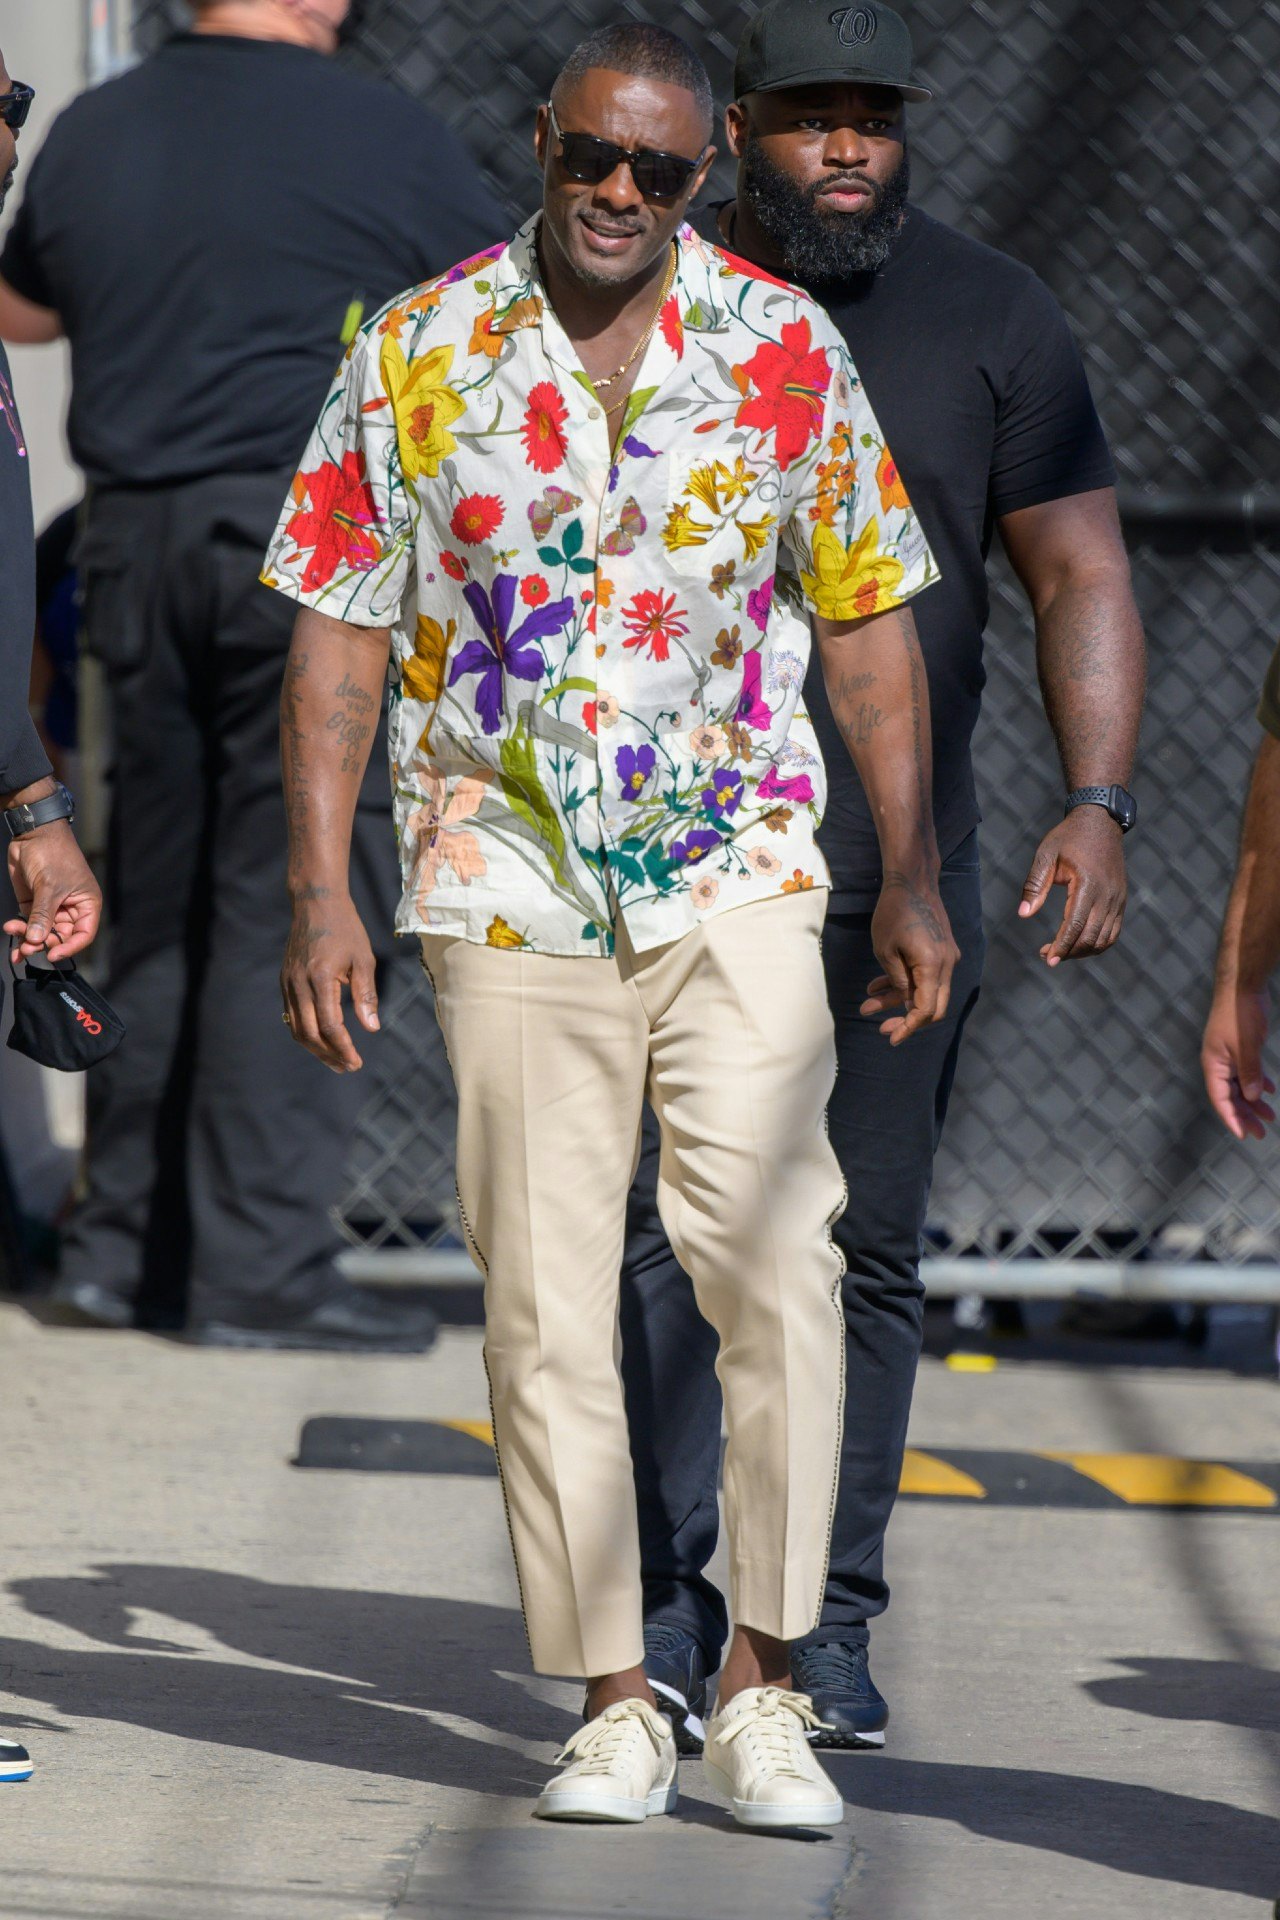 A Floral Shirt That Looks Great and Doesn't Overpower Your Look